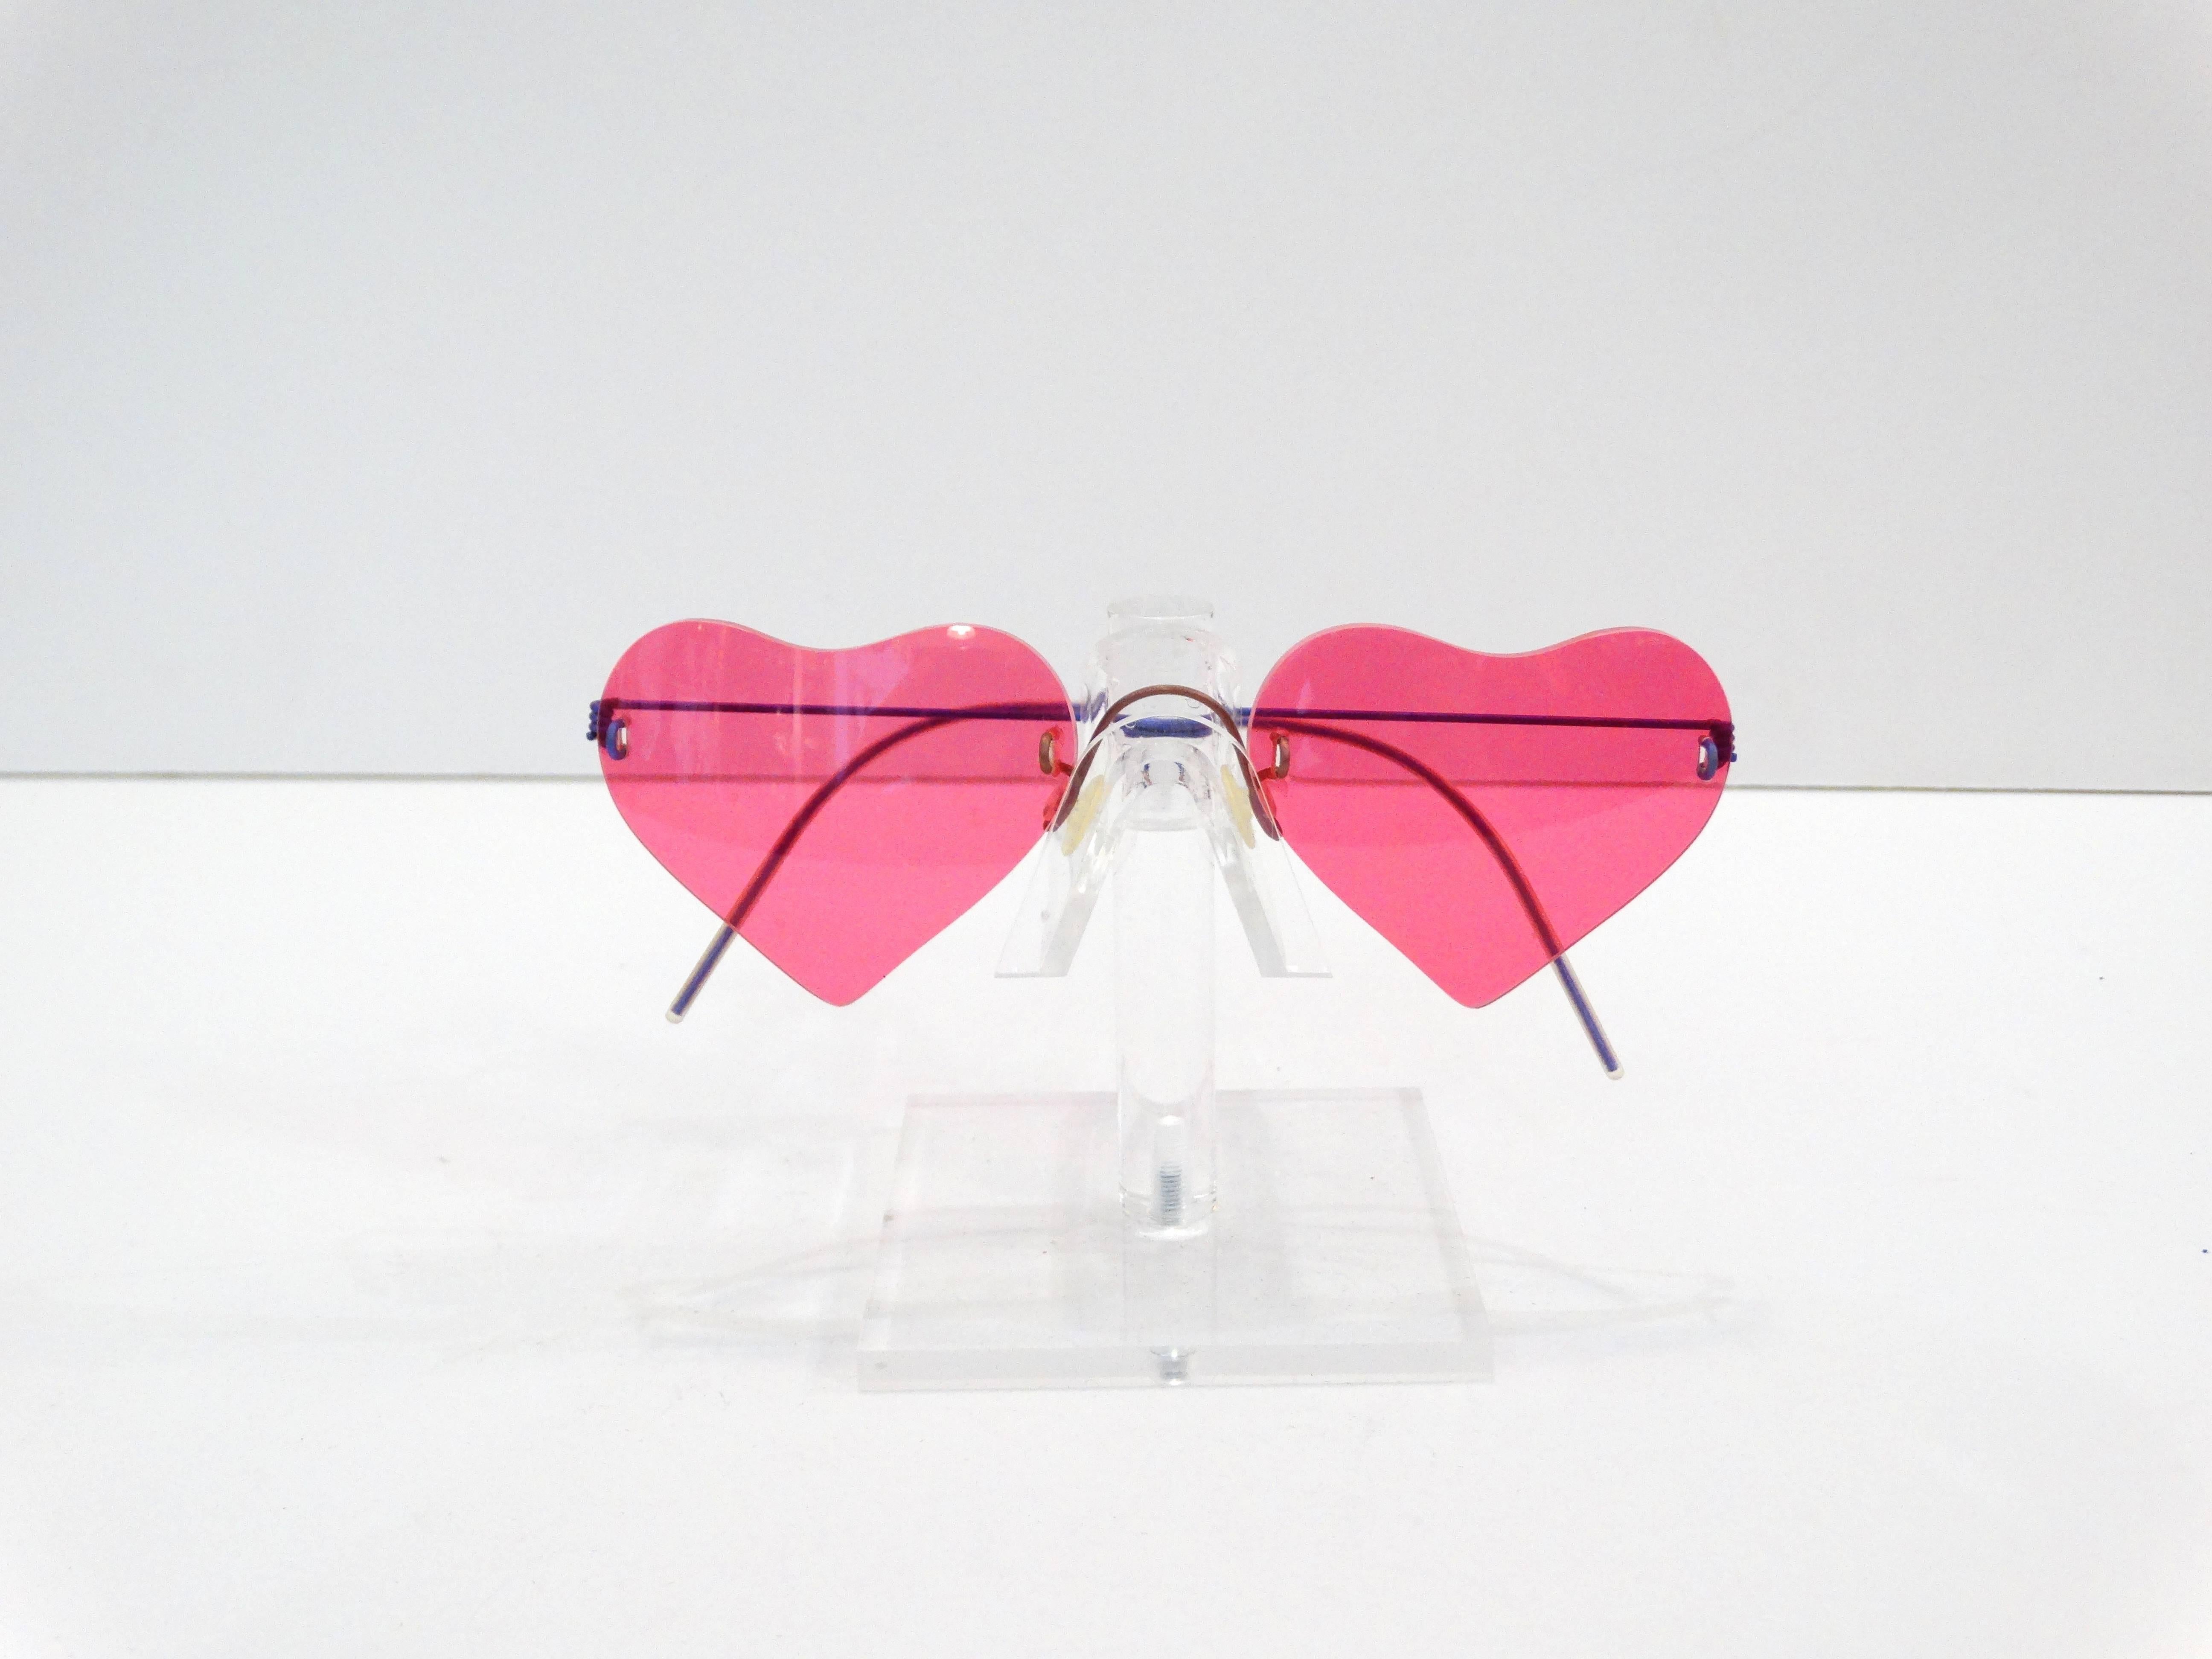 Serve the iconic Lolita look in these vintage Lindberg heart shaped frames! Pink laser cut glass with purple wire frames! Comes with original case and yellow cleaning cloth. 

Lens Height: 1.75